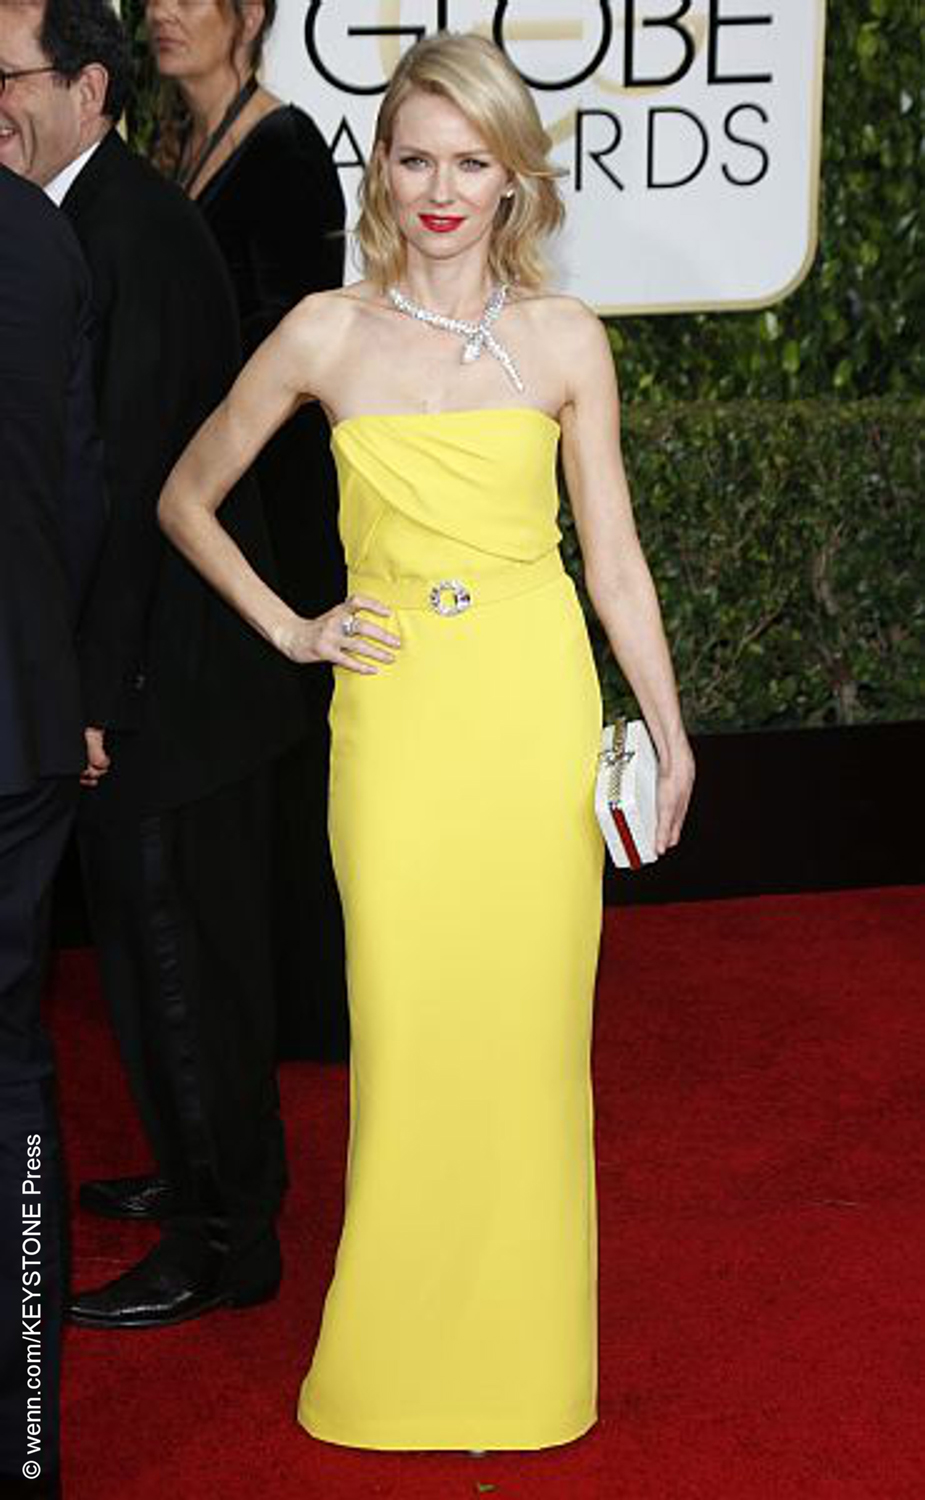 Presenter Naomi Watts was another actress who chose to rock the red carpet by wearing yellow. She wore a simple strapless Gucci gown paired with a statement necklace and bold red lip to tie the classic look together.